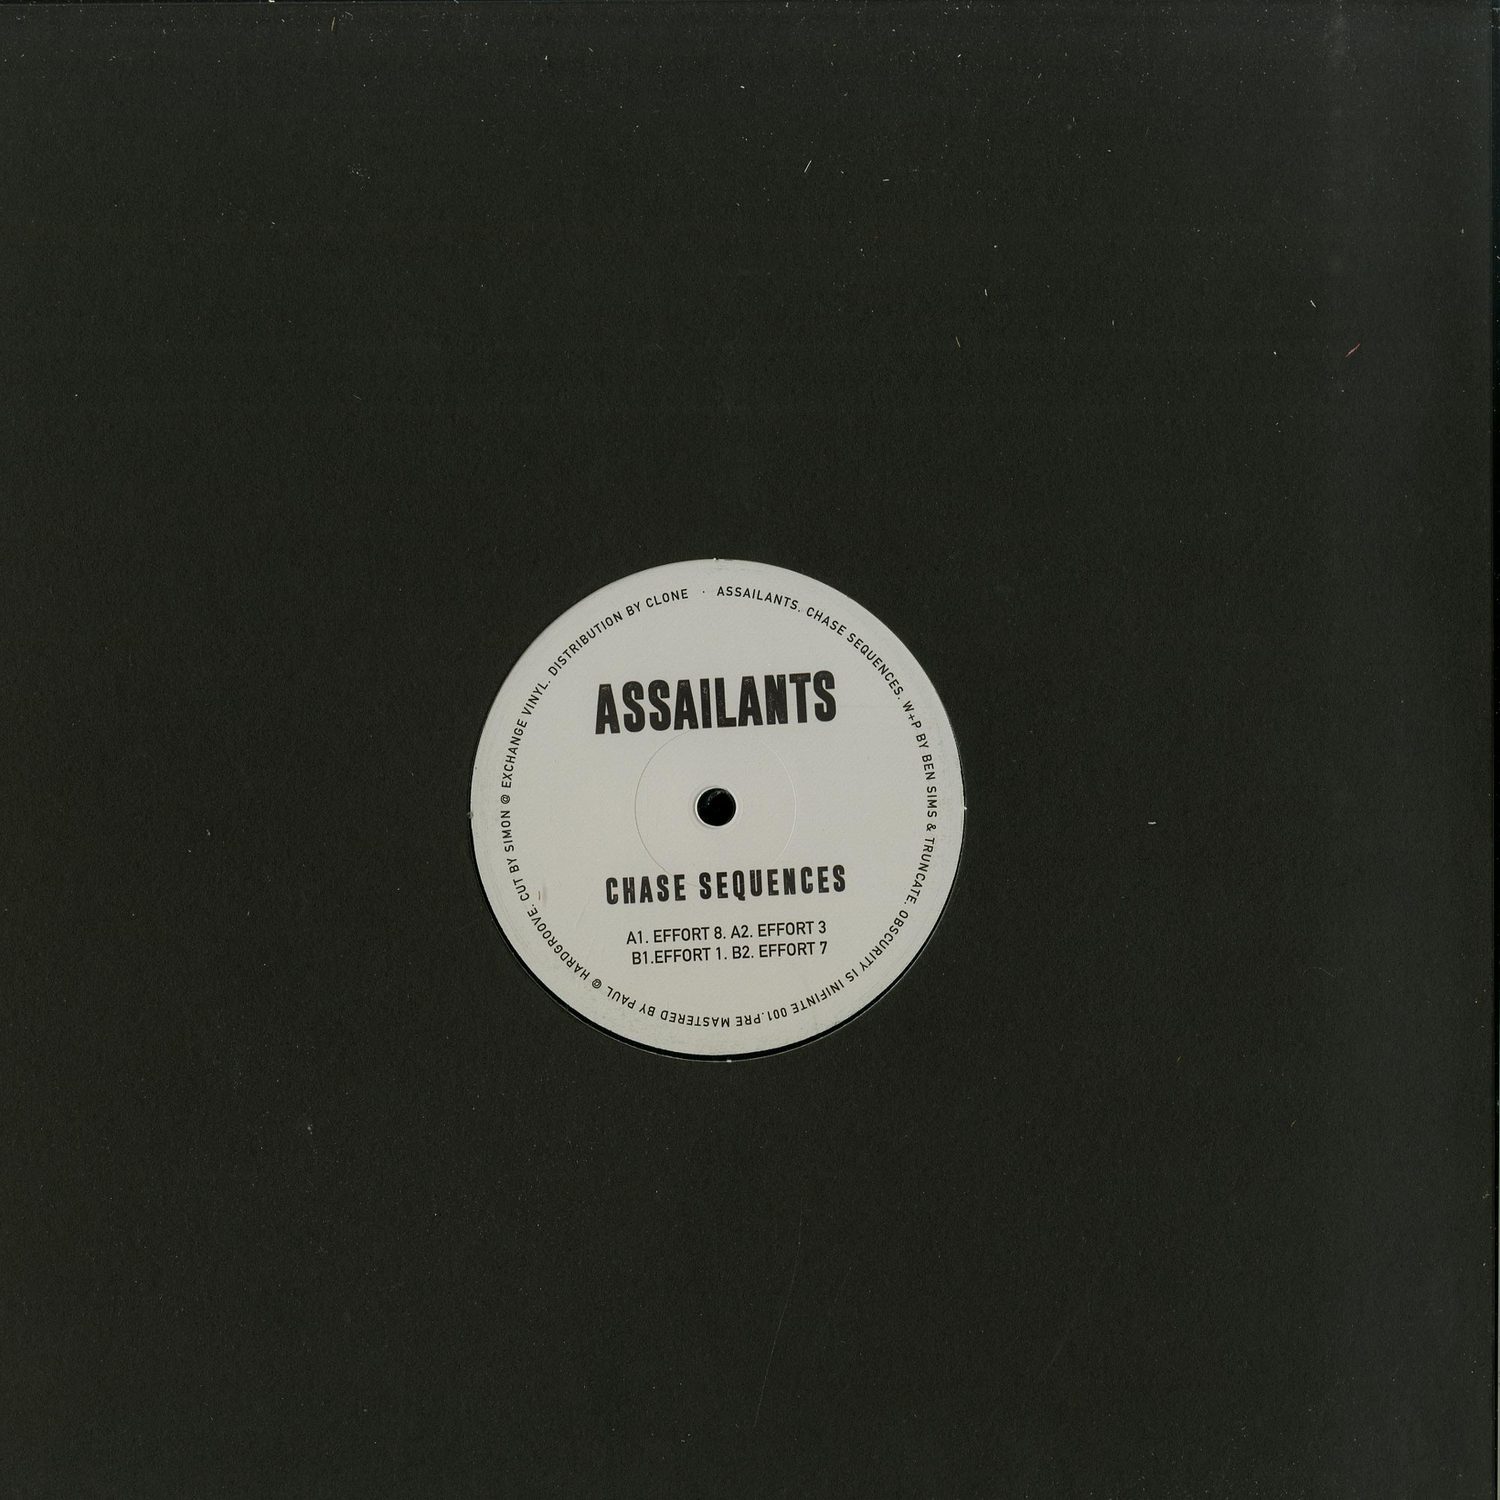 Assailants - CHASE SEQUENCES 